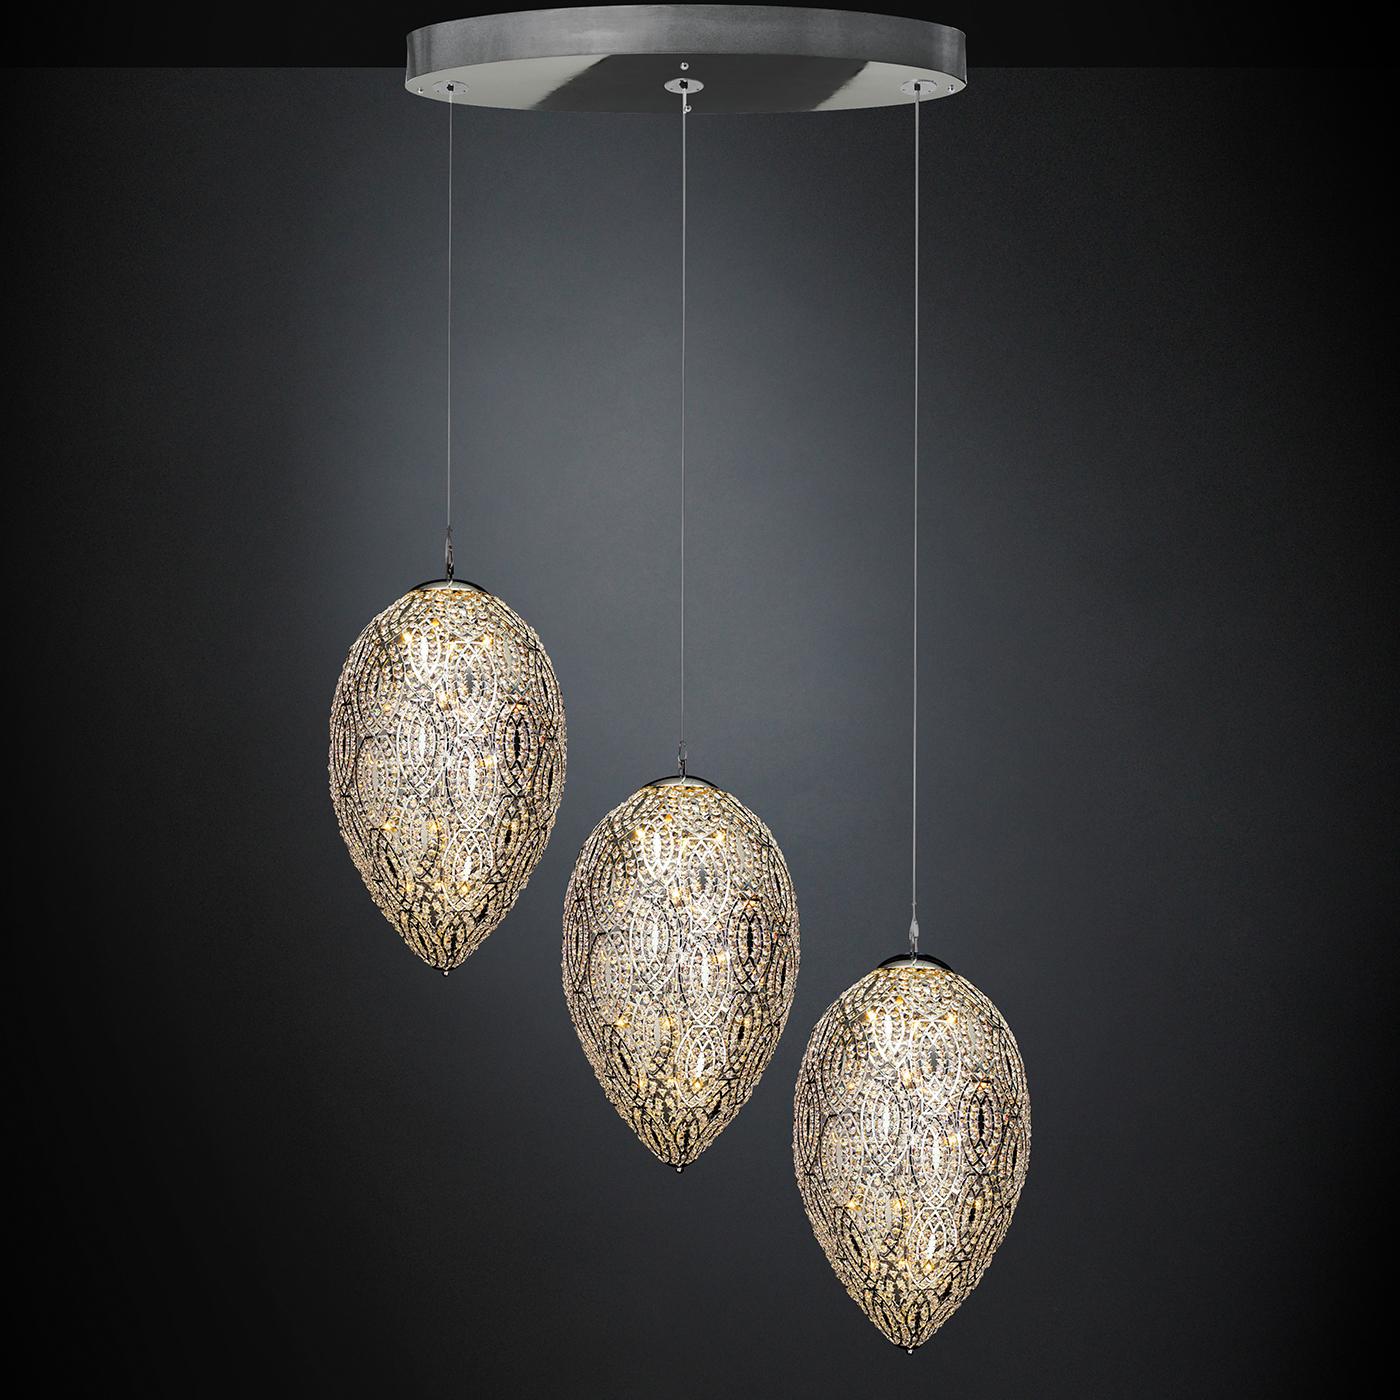 The epitome of luxury, the Arabesque Collection combines the sparkling transparency of the multi-faceted Asfour crystals applied by hand on the chromed steel leaf-shaped pendants showcasing an intricate pattern of interlaced lines. Featured with